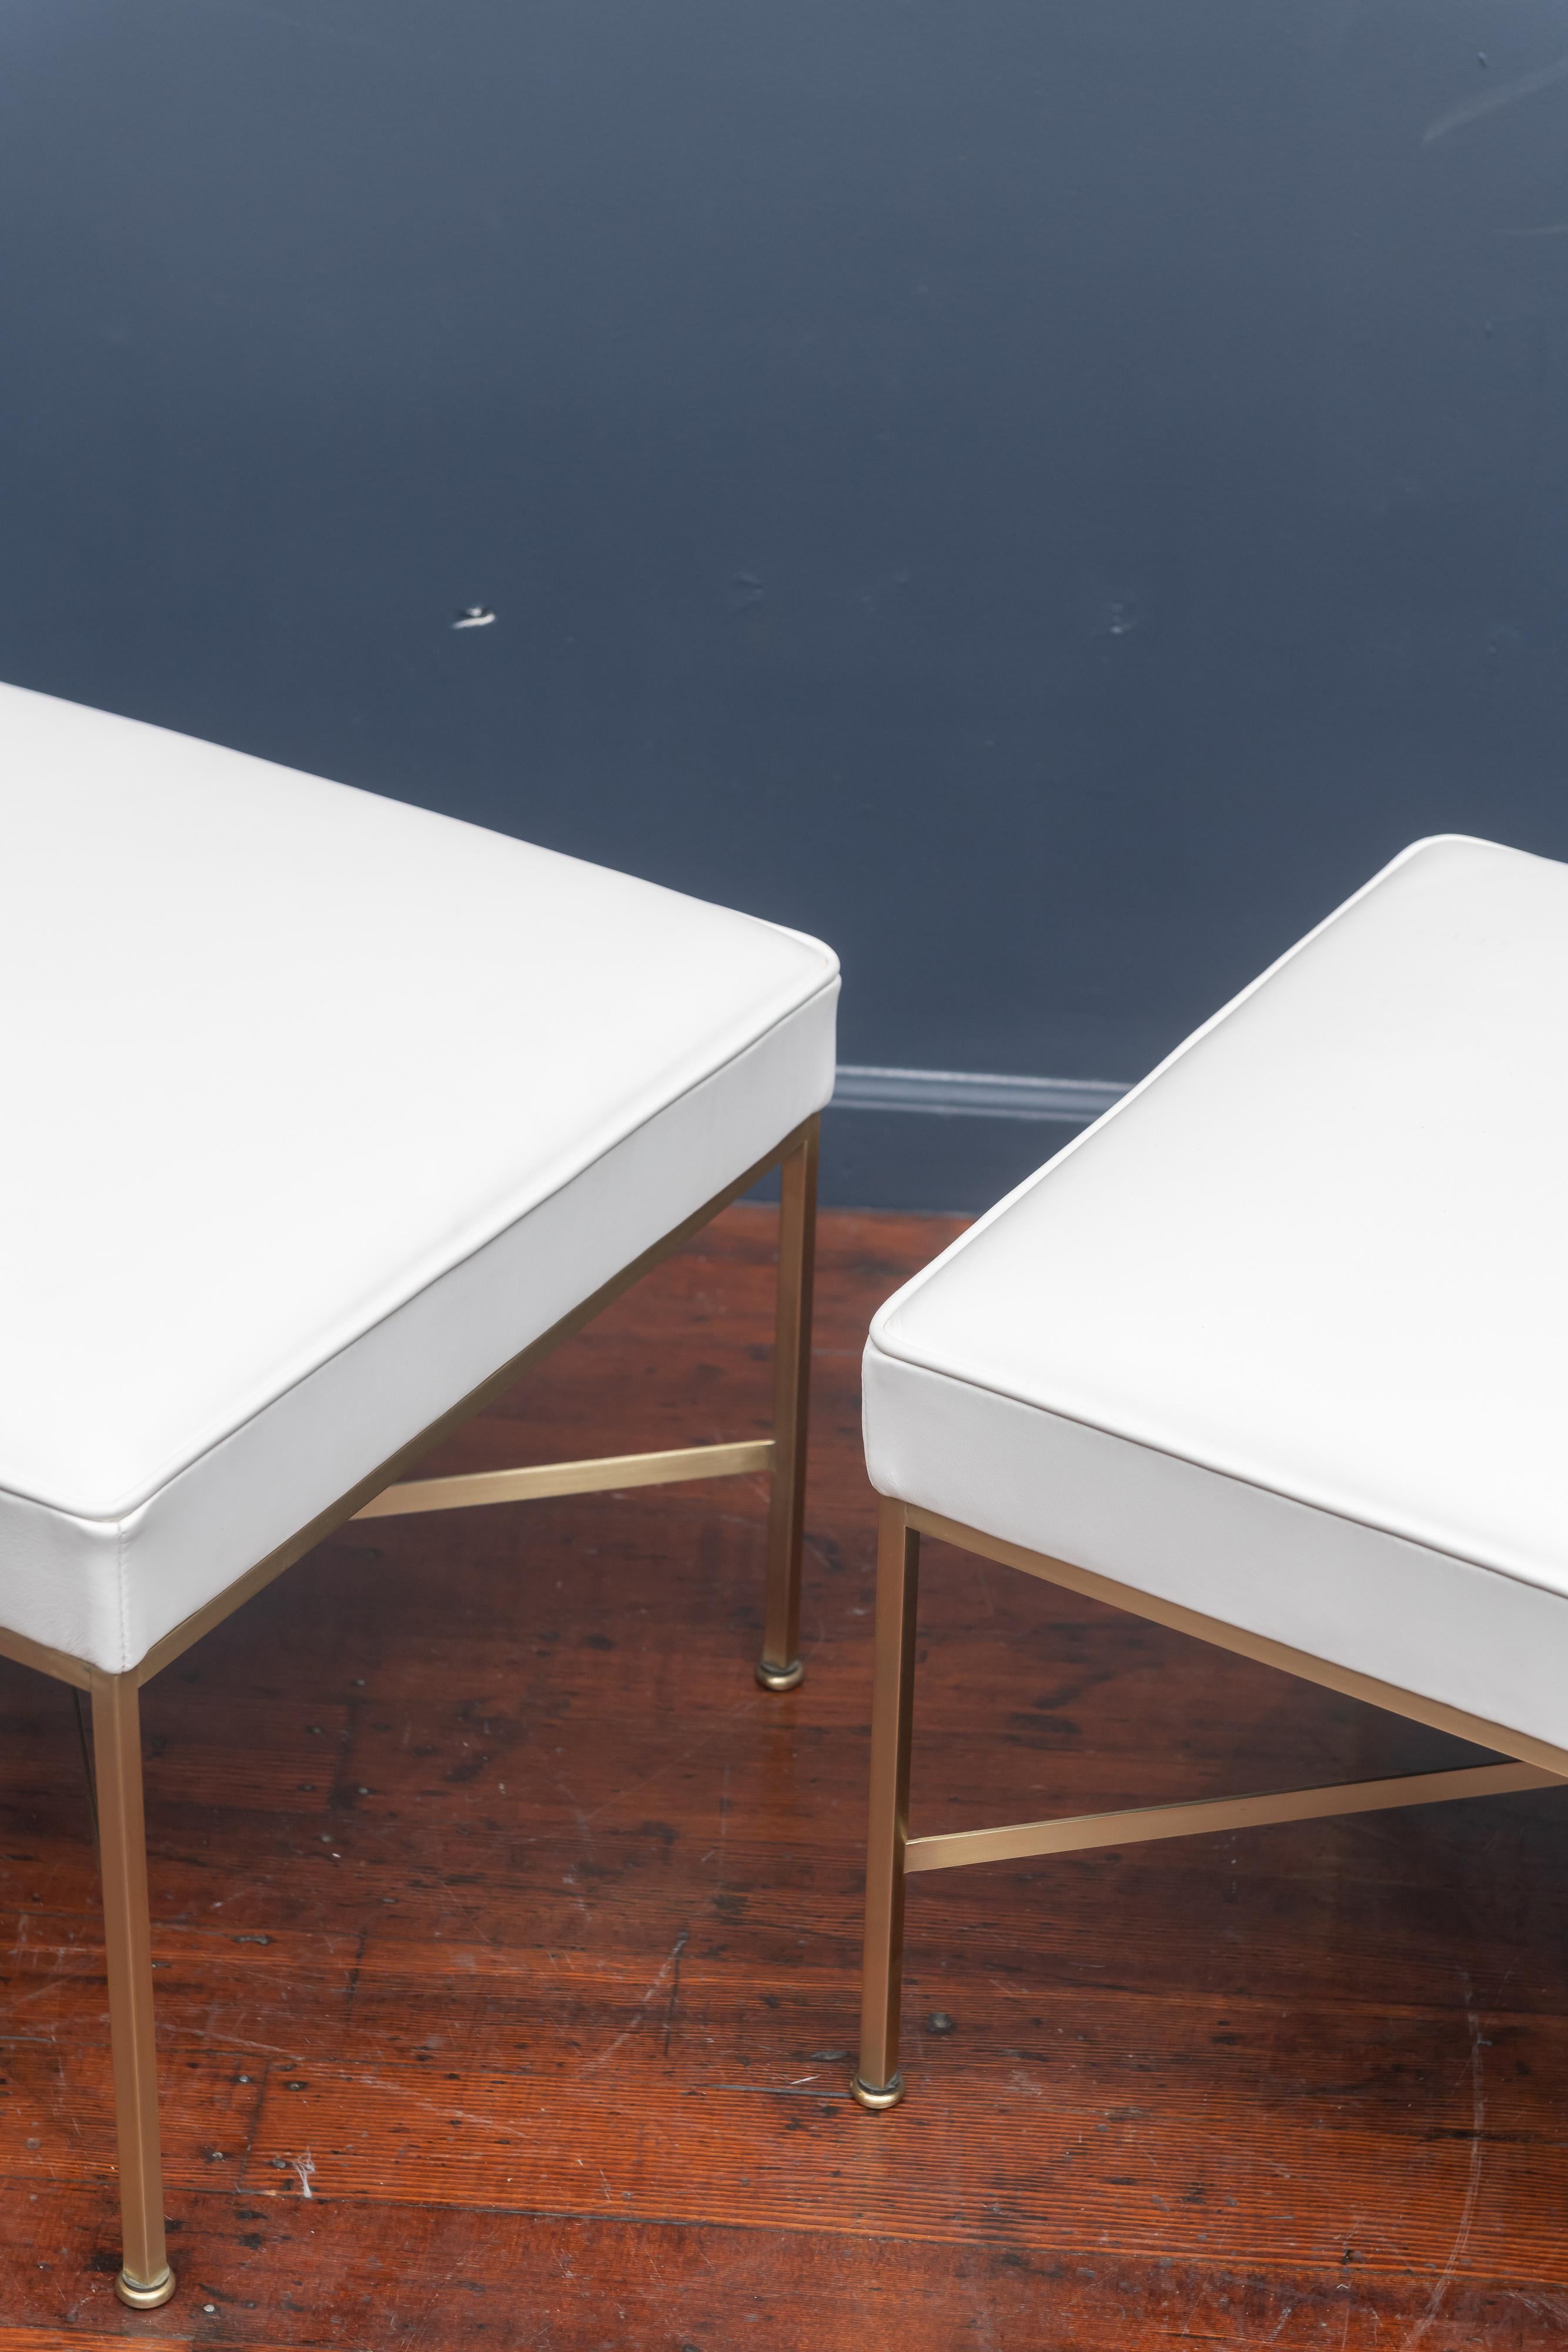 Pair of Paul McCobb X-base brass ottomans newly upholstered in off white leather.